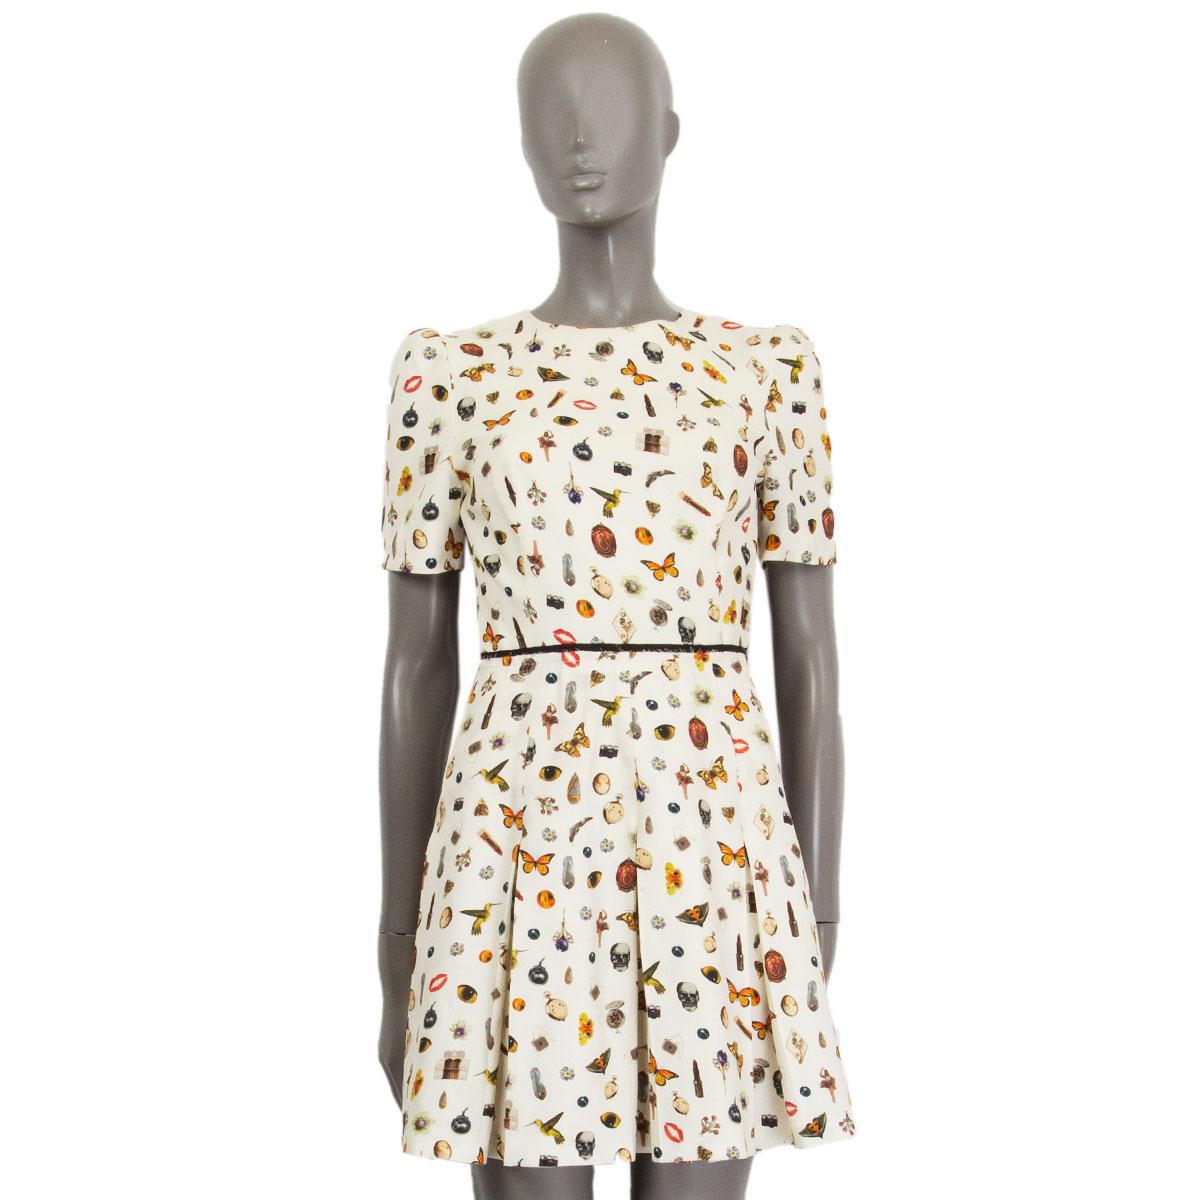 authentic Alexander McQueen Obsession-print dress from 2016 in cream and multi-color viscose (100%) with a pleated bottom, padded shoulders and short sleeves. Lined in cream viscose (50%) cotton (50%). Closes with a concealed zipper in the back. Has